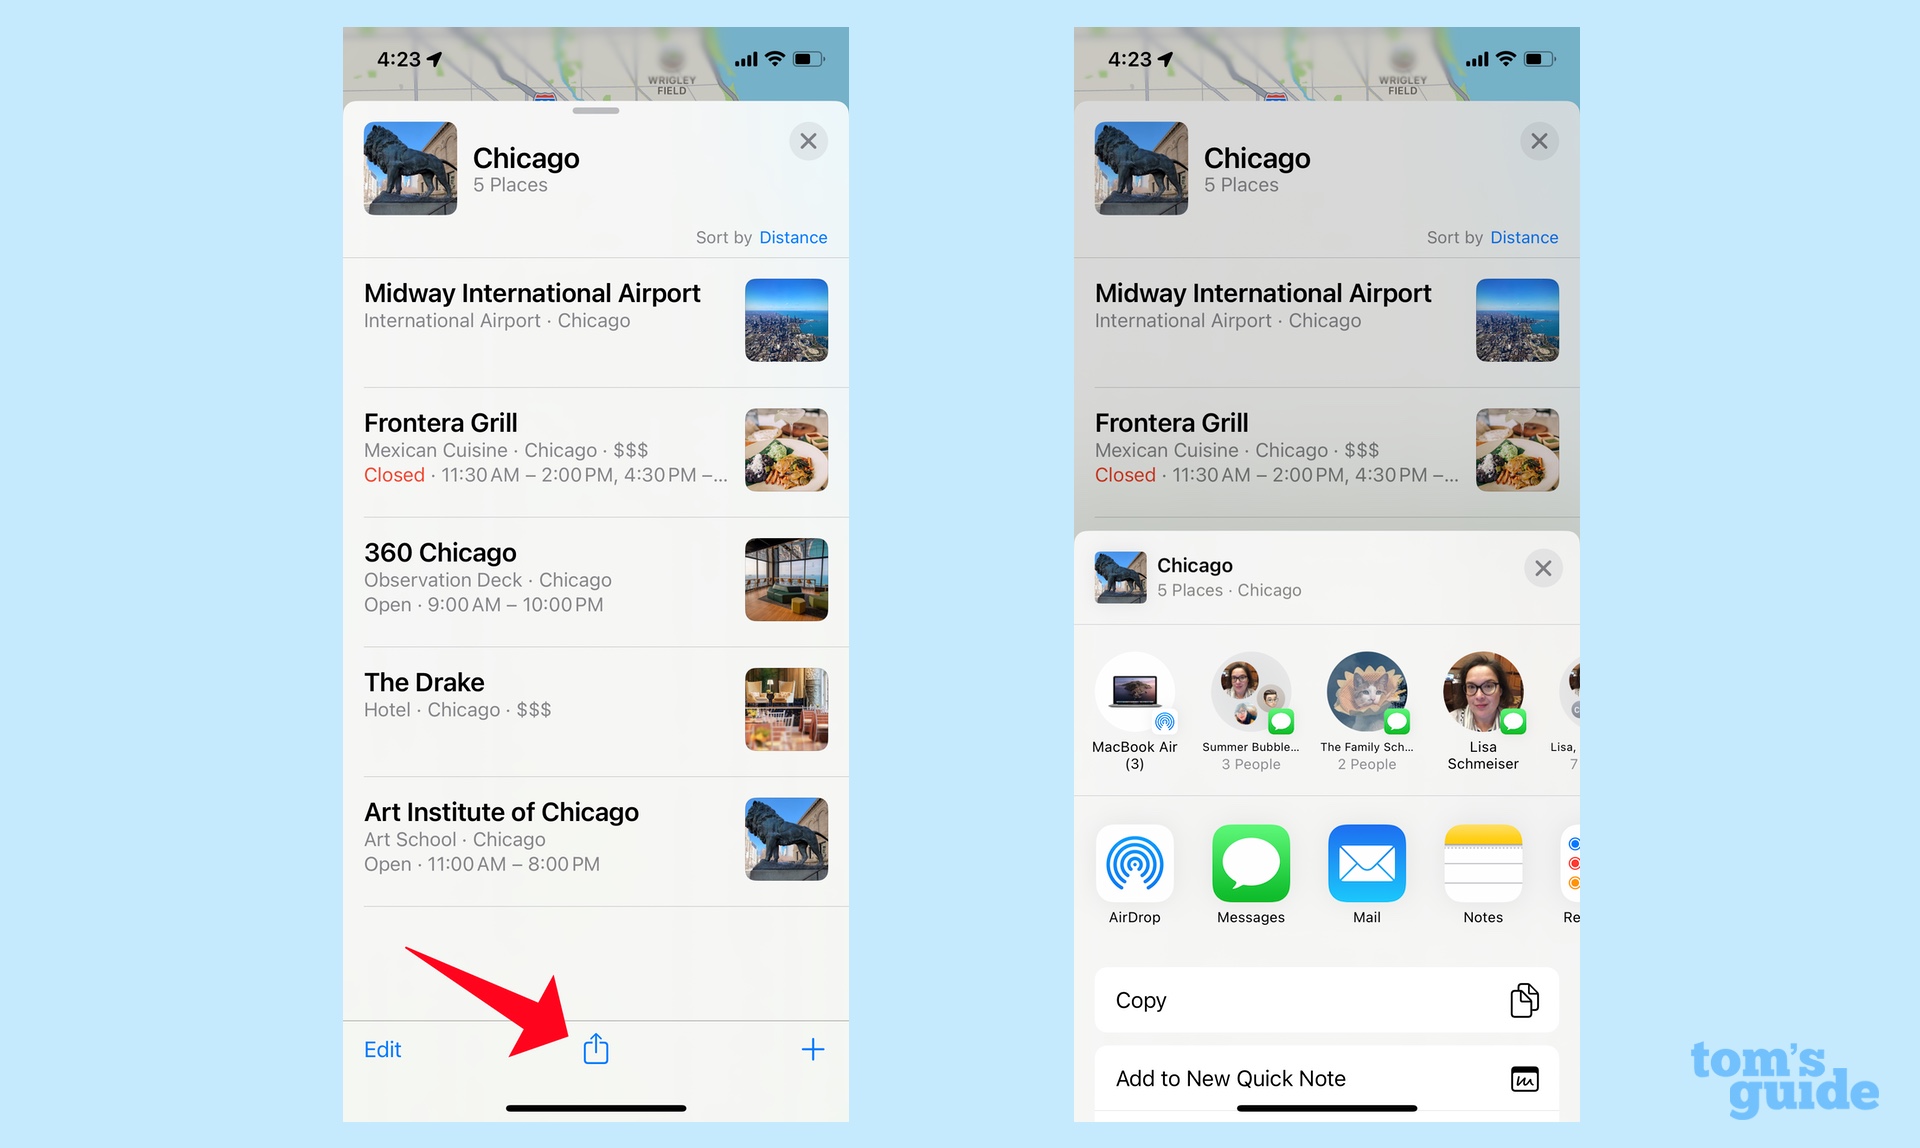 how to create guides in apple maps share guide from iPhone